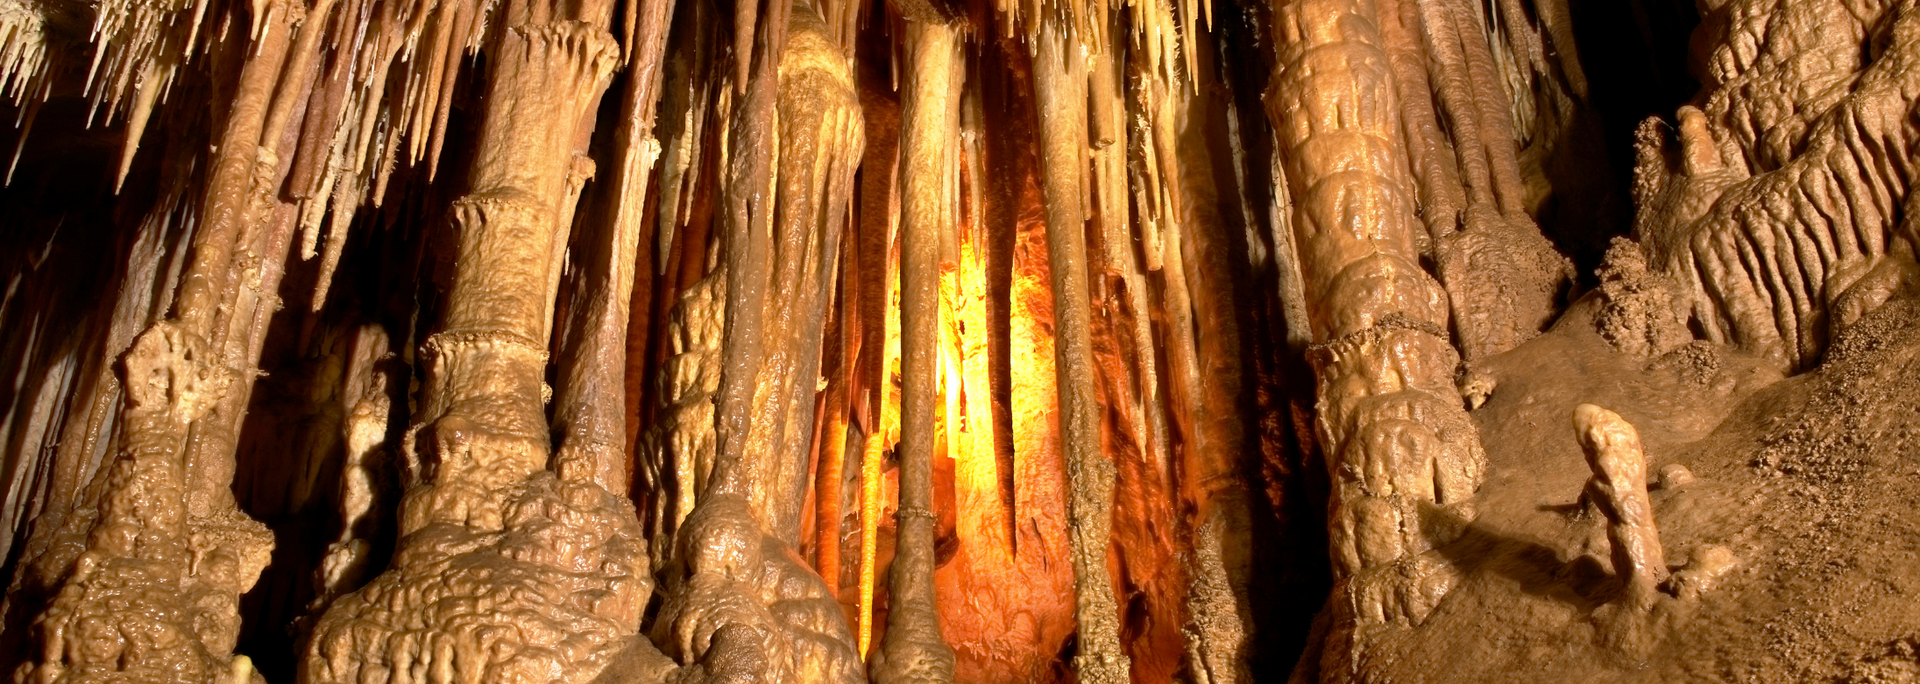 Picture of a stalagnate